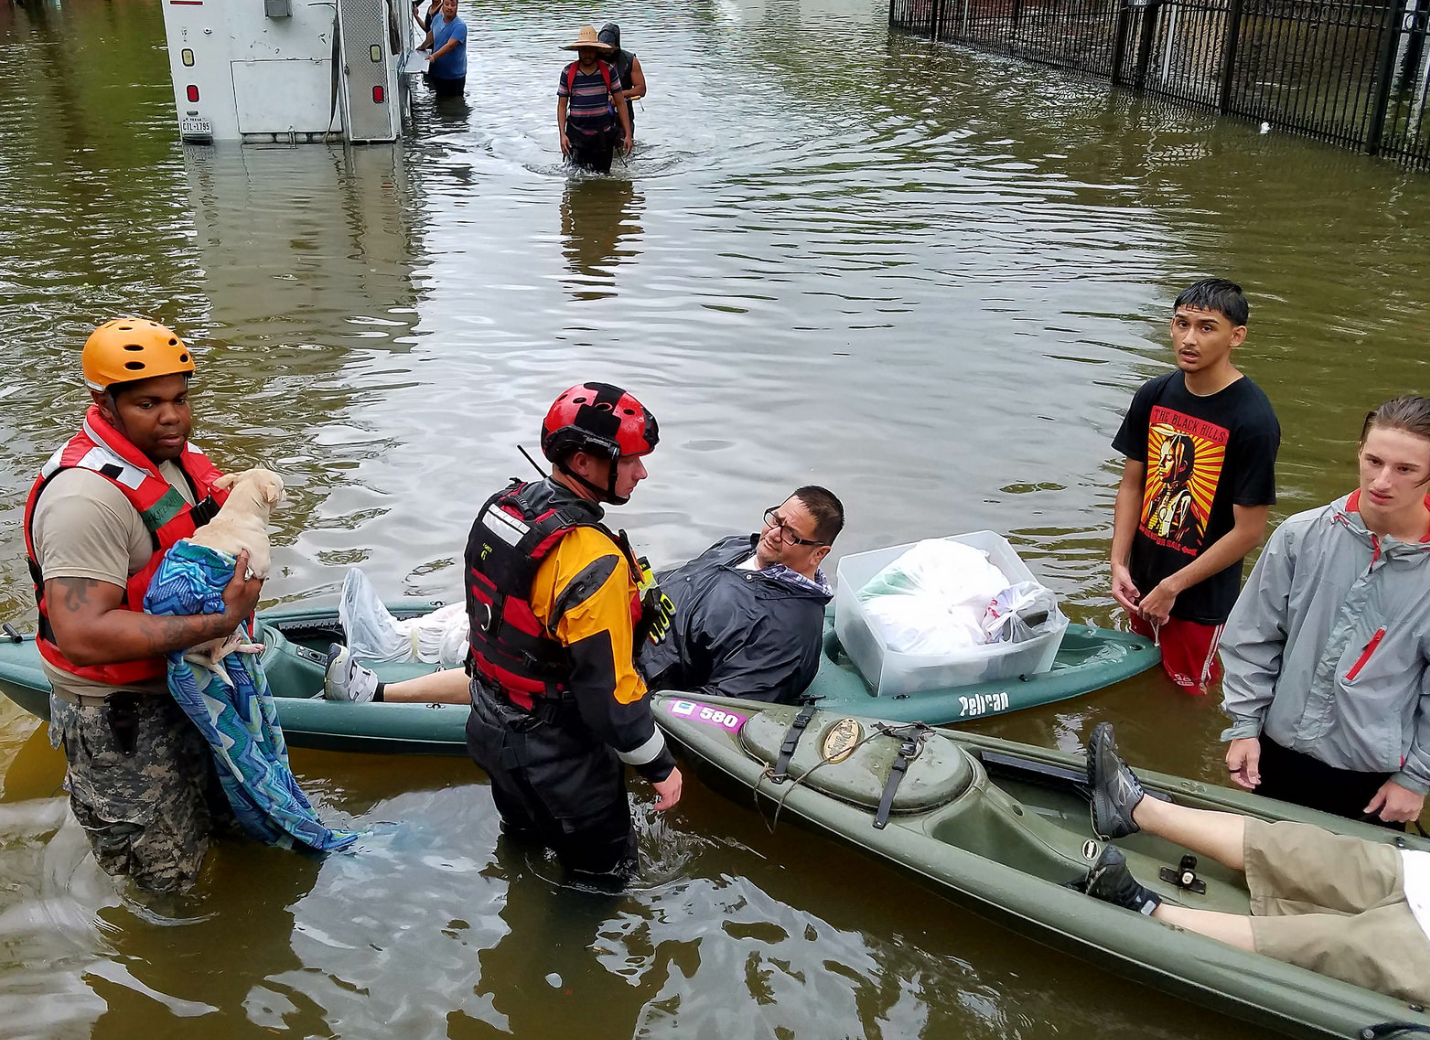 Men in a boat during a flood